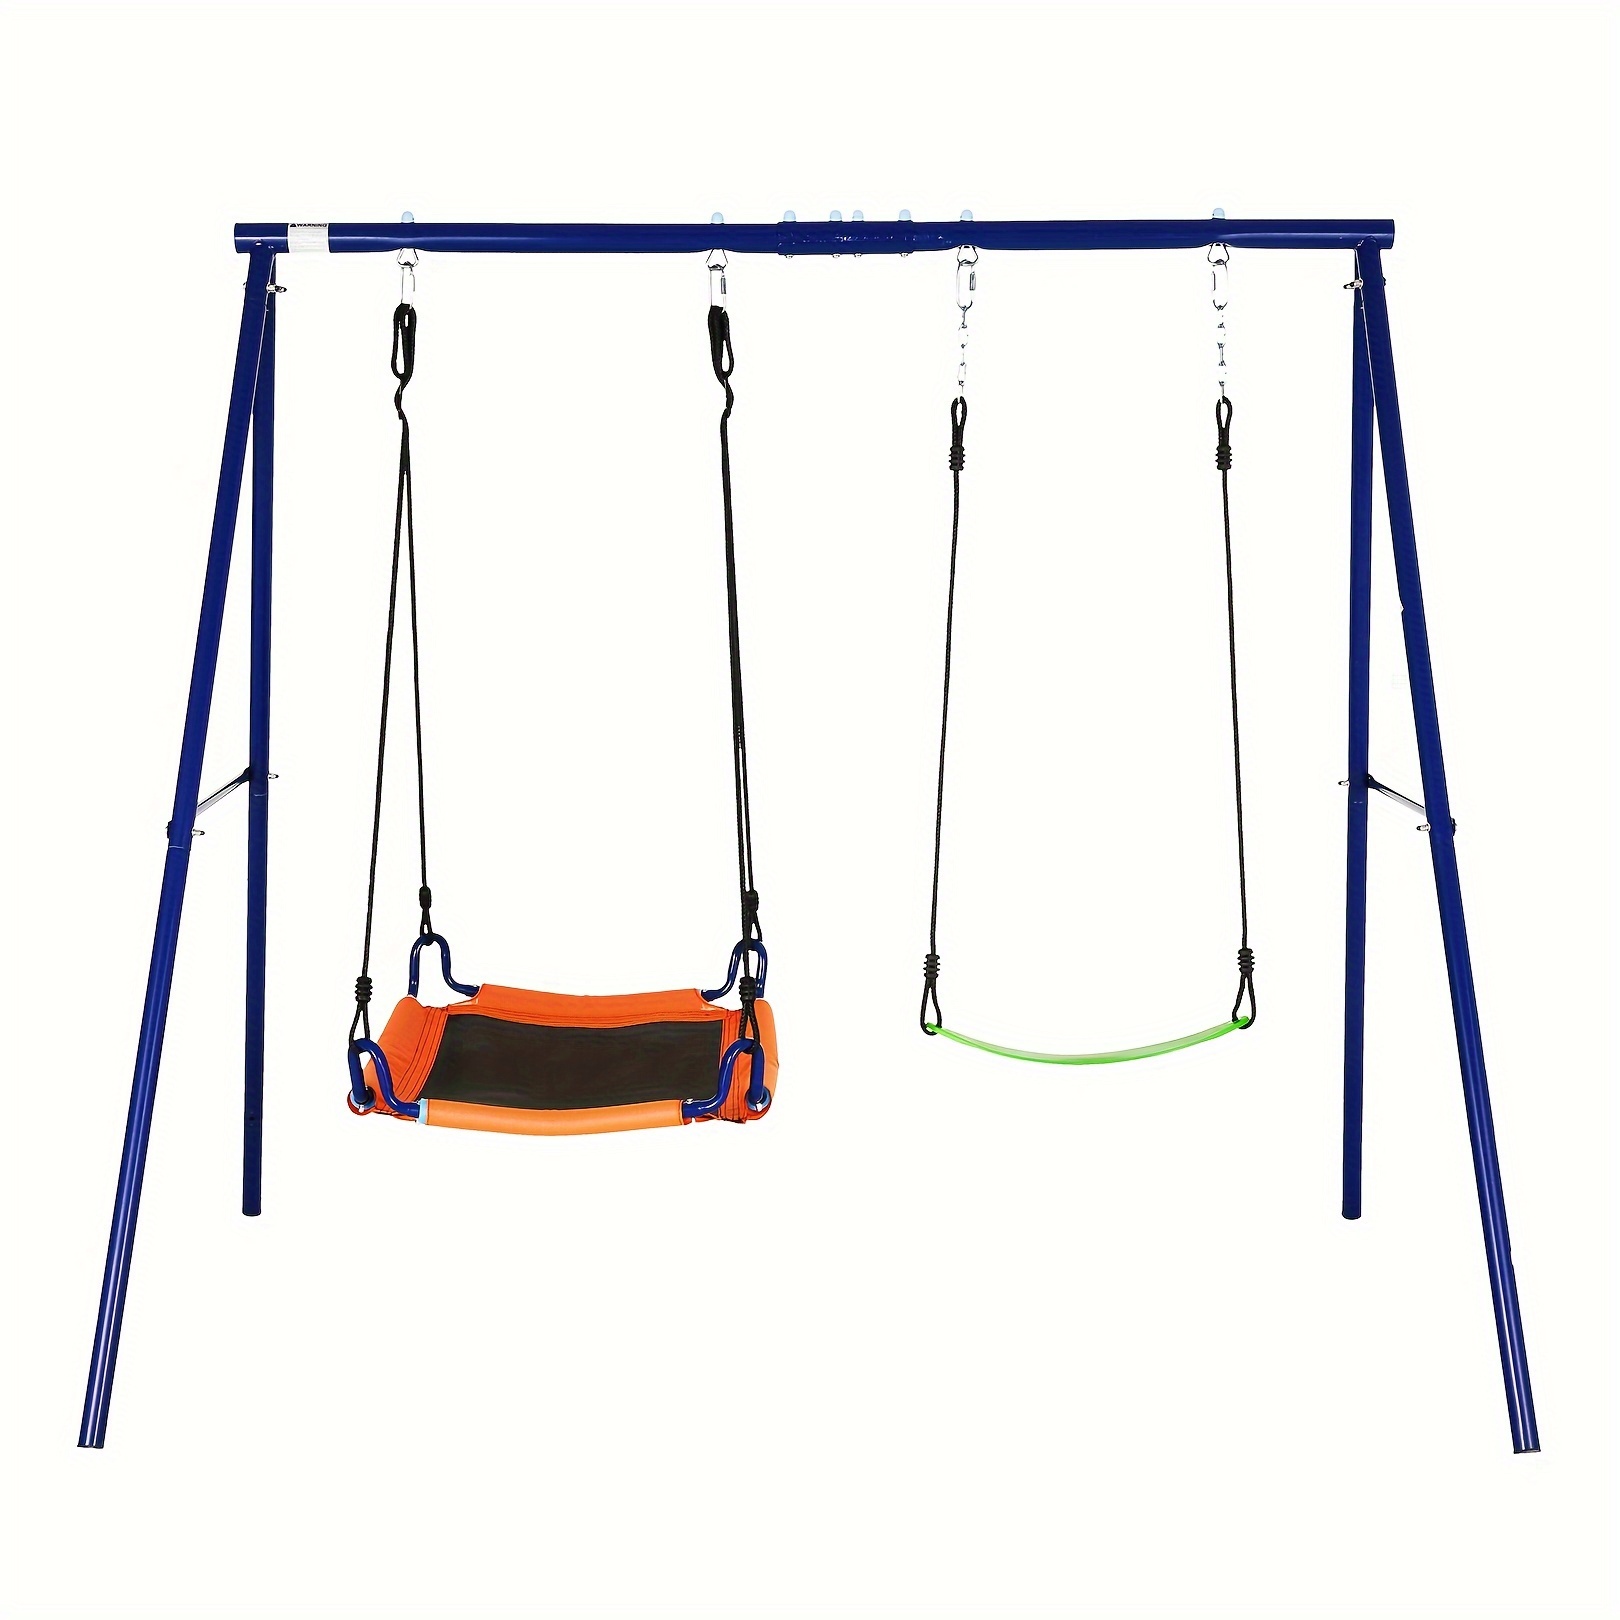 

Swing Set, 1 Bracket And 1 Belt Swing Seat, Suitable For Playgrounds, Backyards, Outdoors, Etc., Backyard Swing Set, A-frame Metal Outdoor Swing